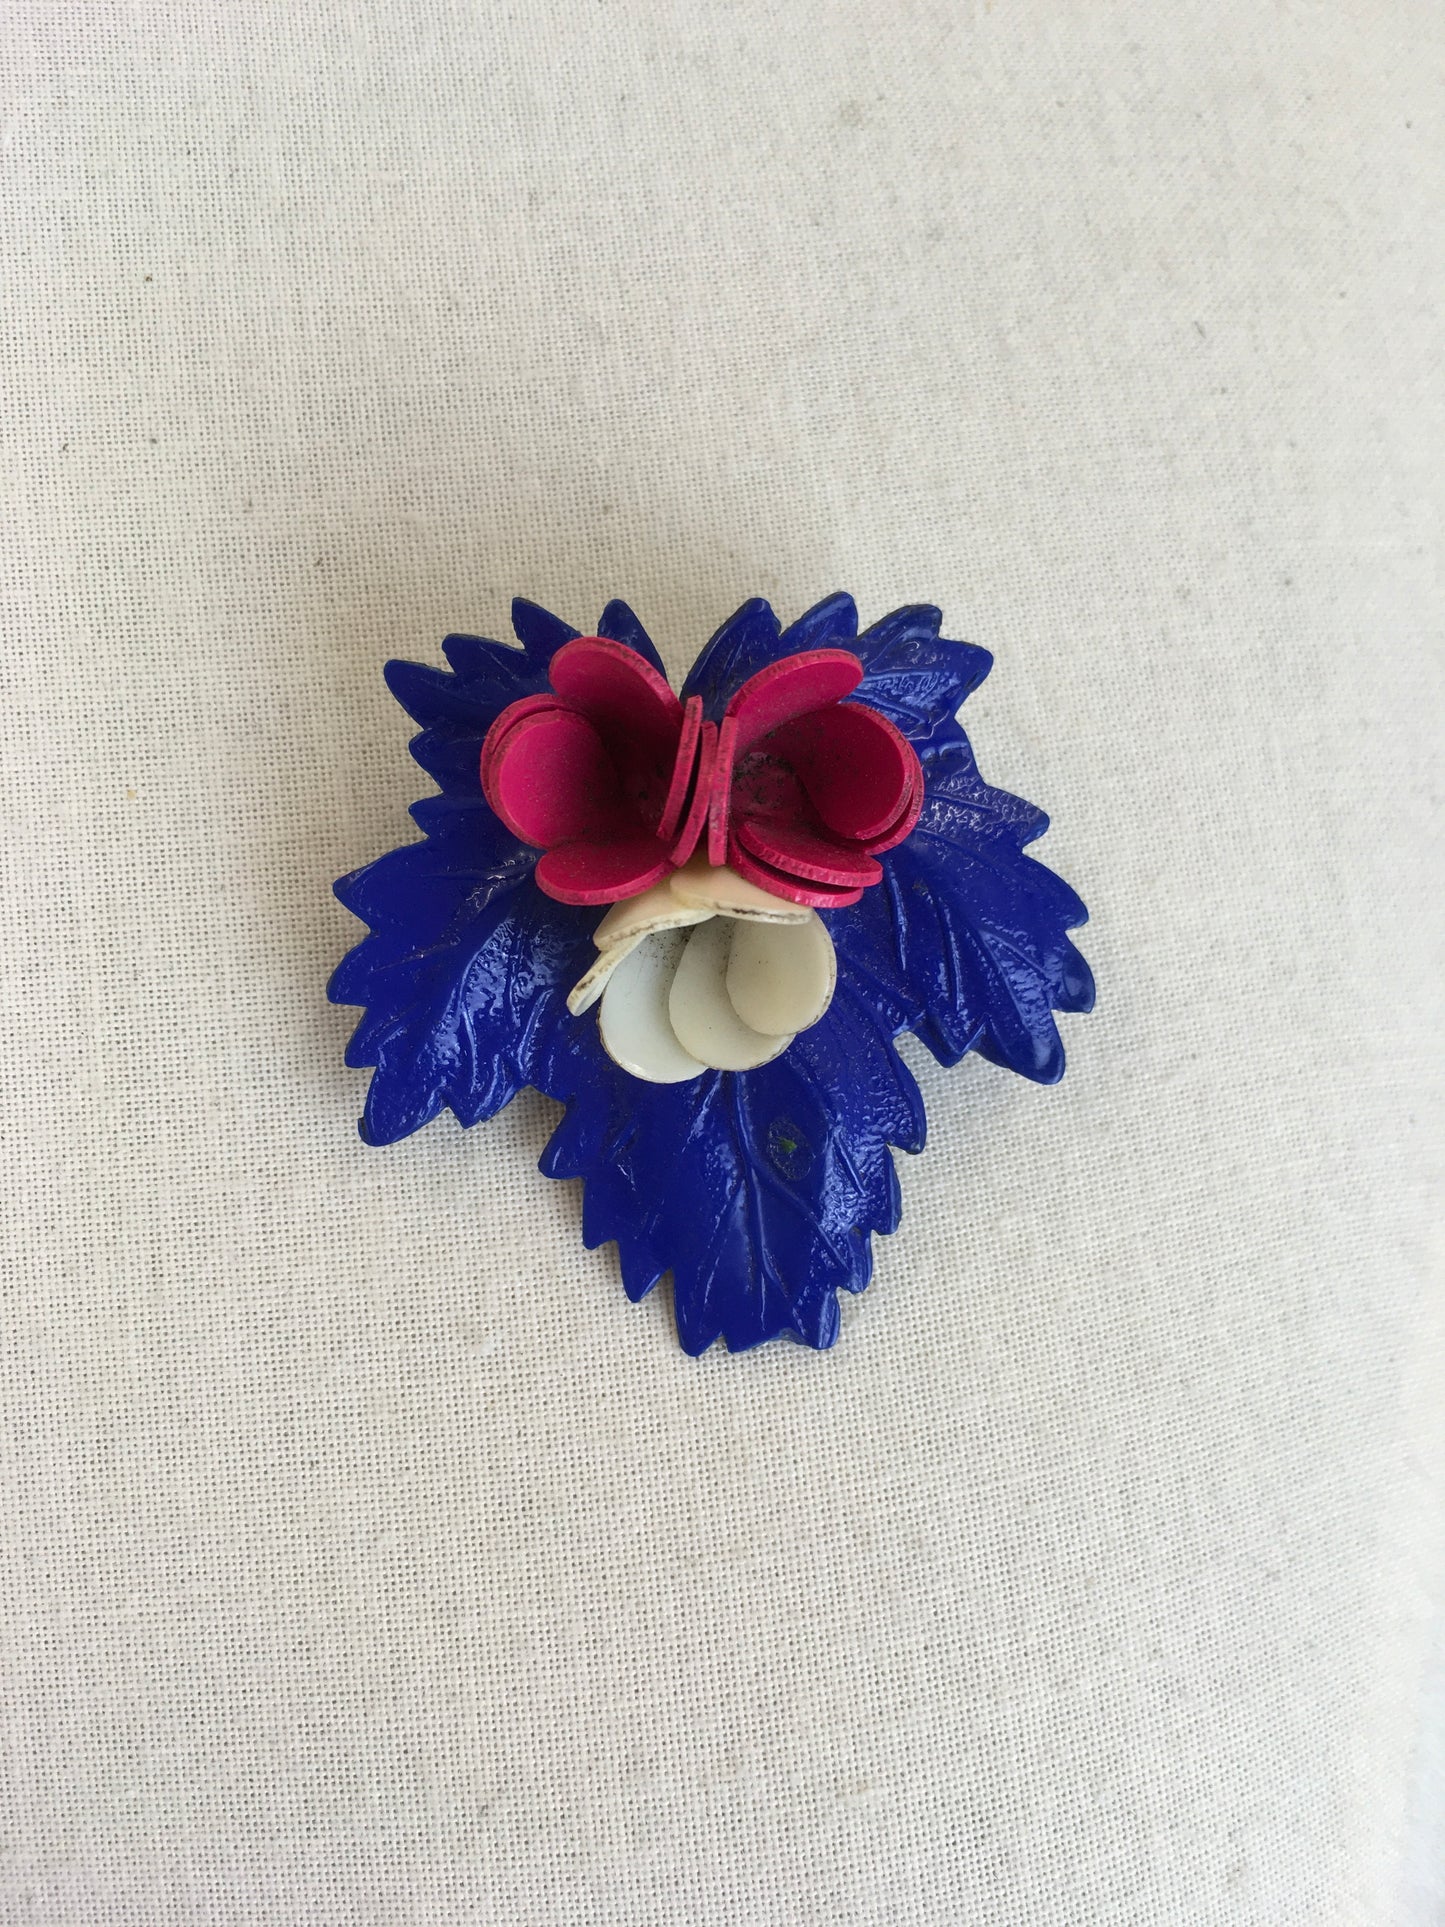 Original 1940’s Celluloid Floral and Leaf Brooch - In Blue, Pink and Cream